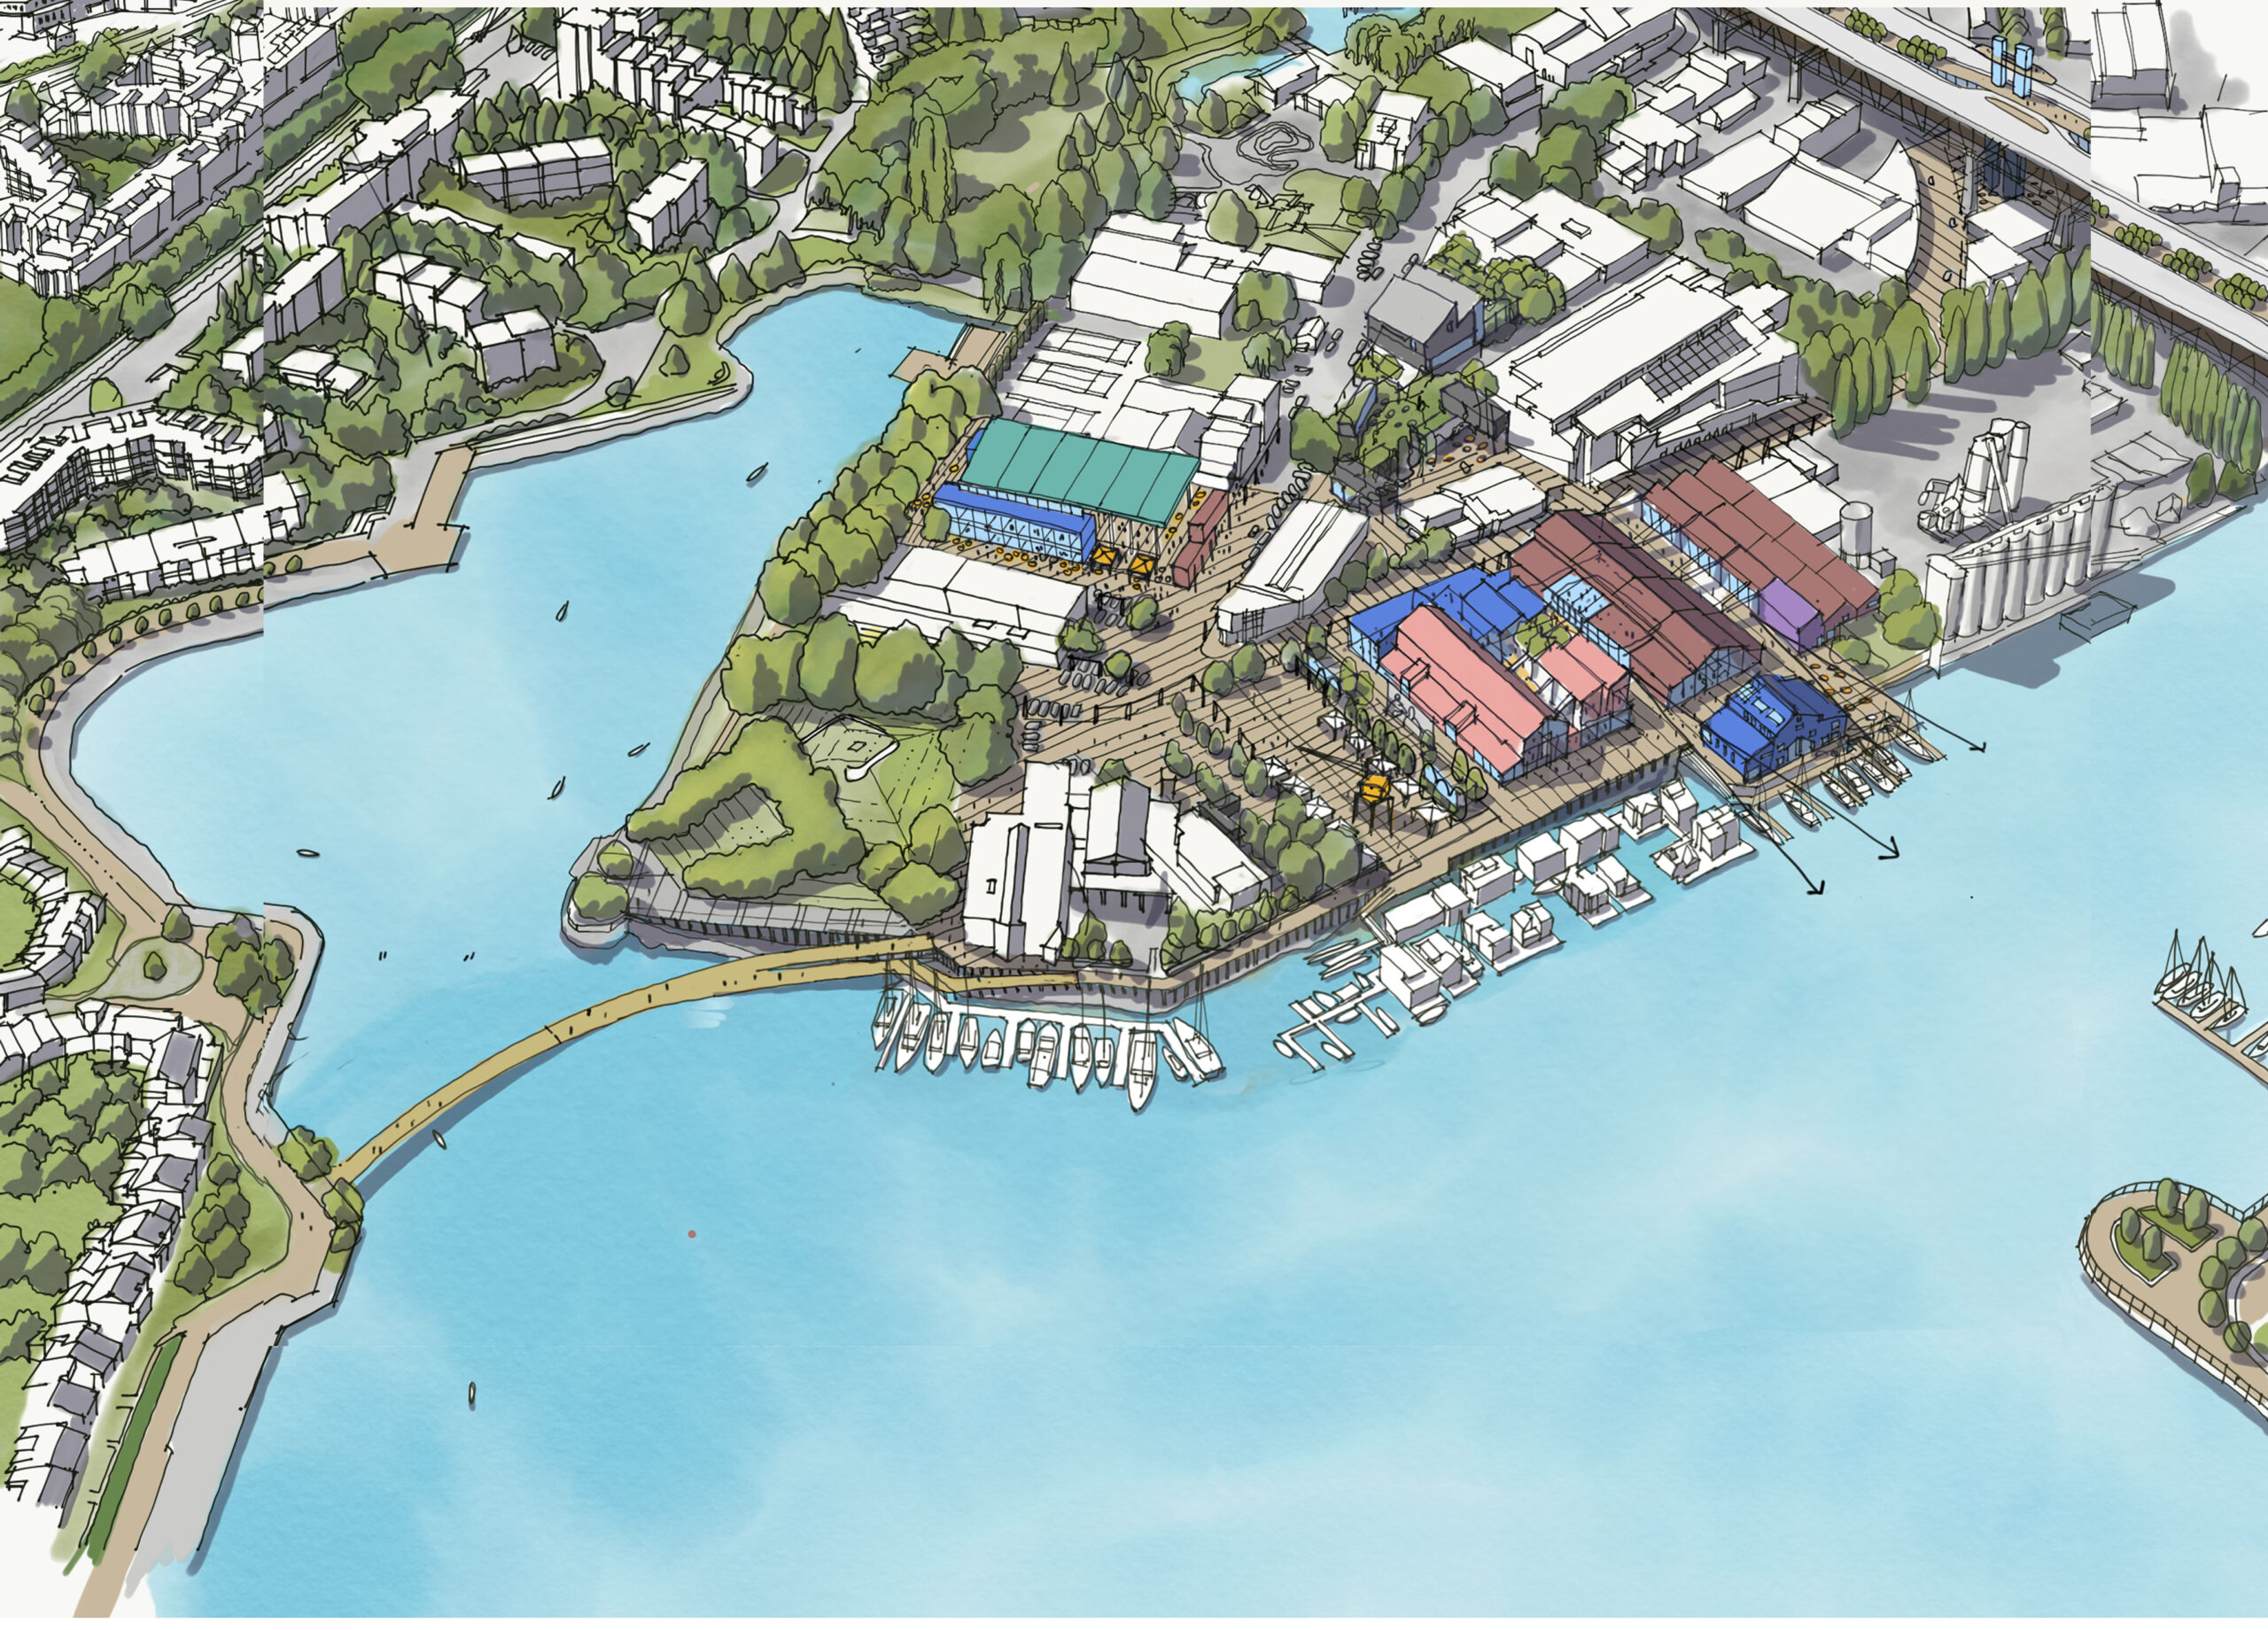 Granville Island Sketch from above.